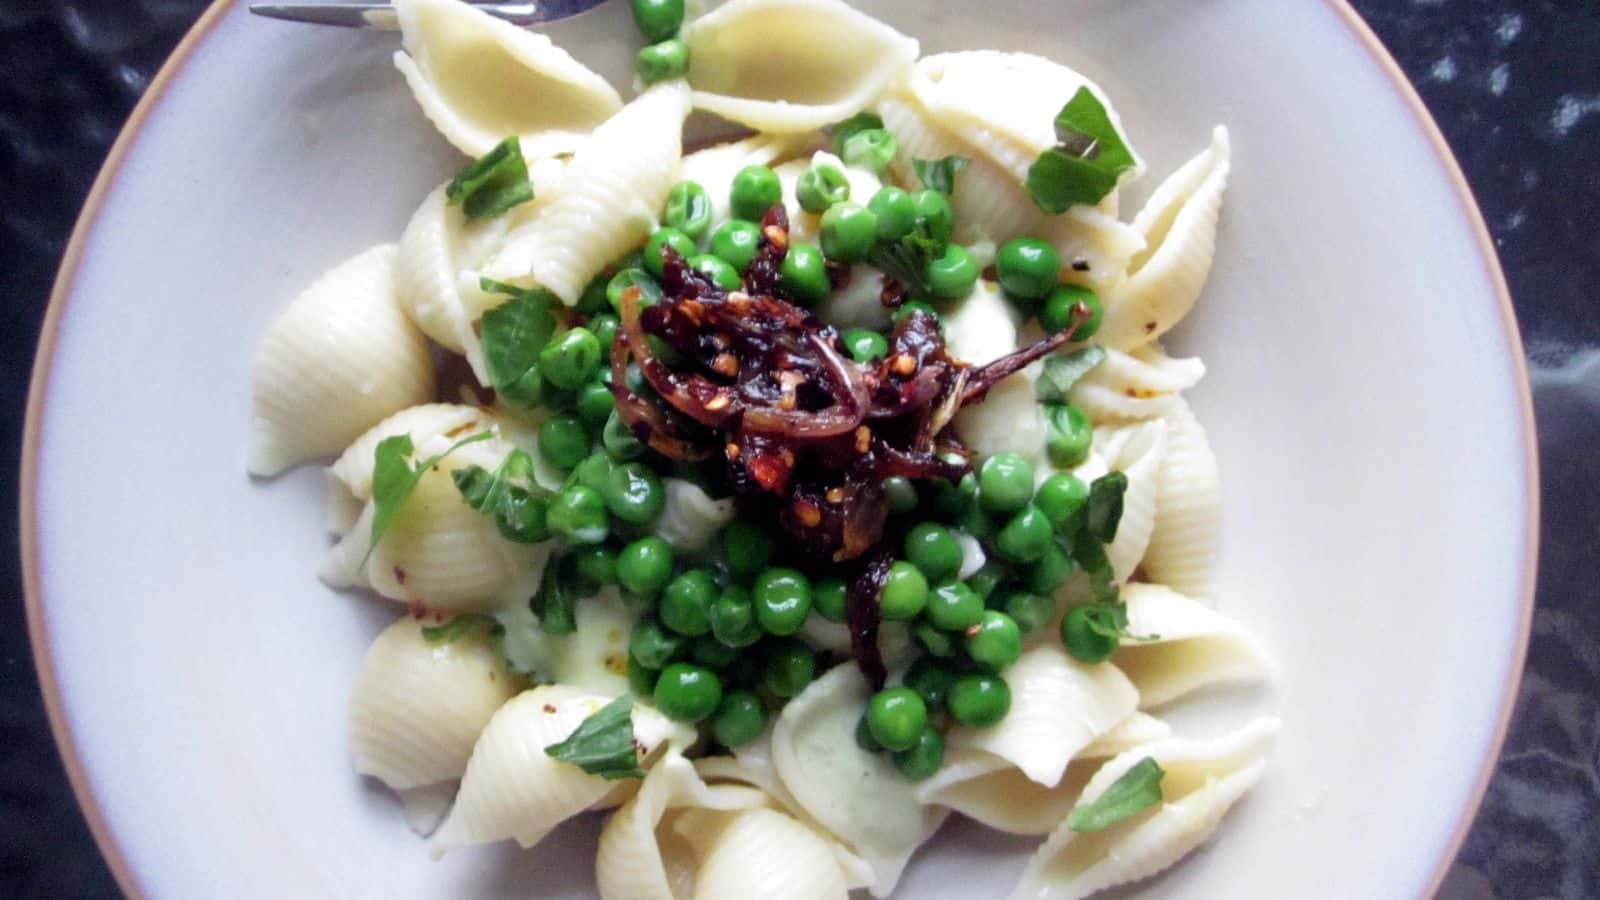 A plate with pasta and peas on it.